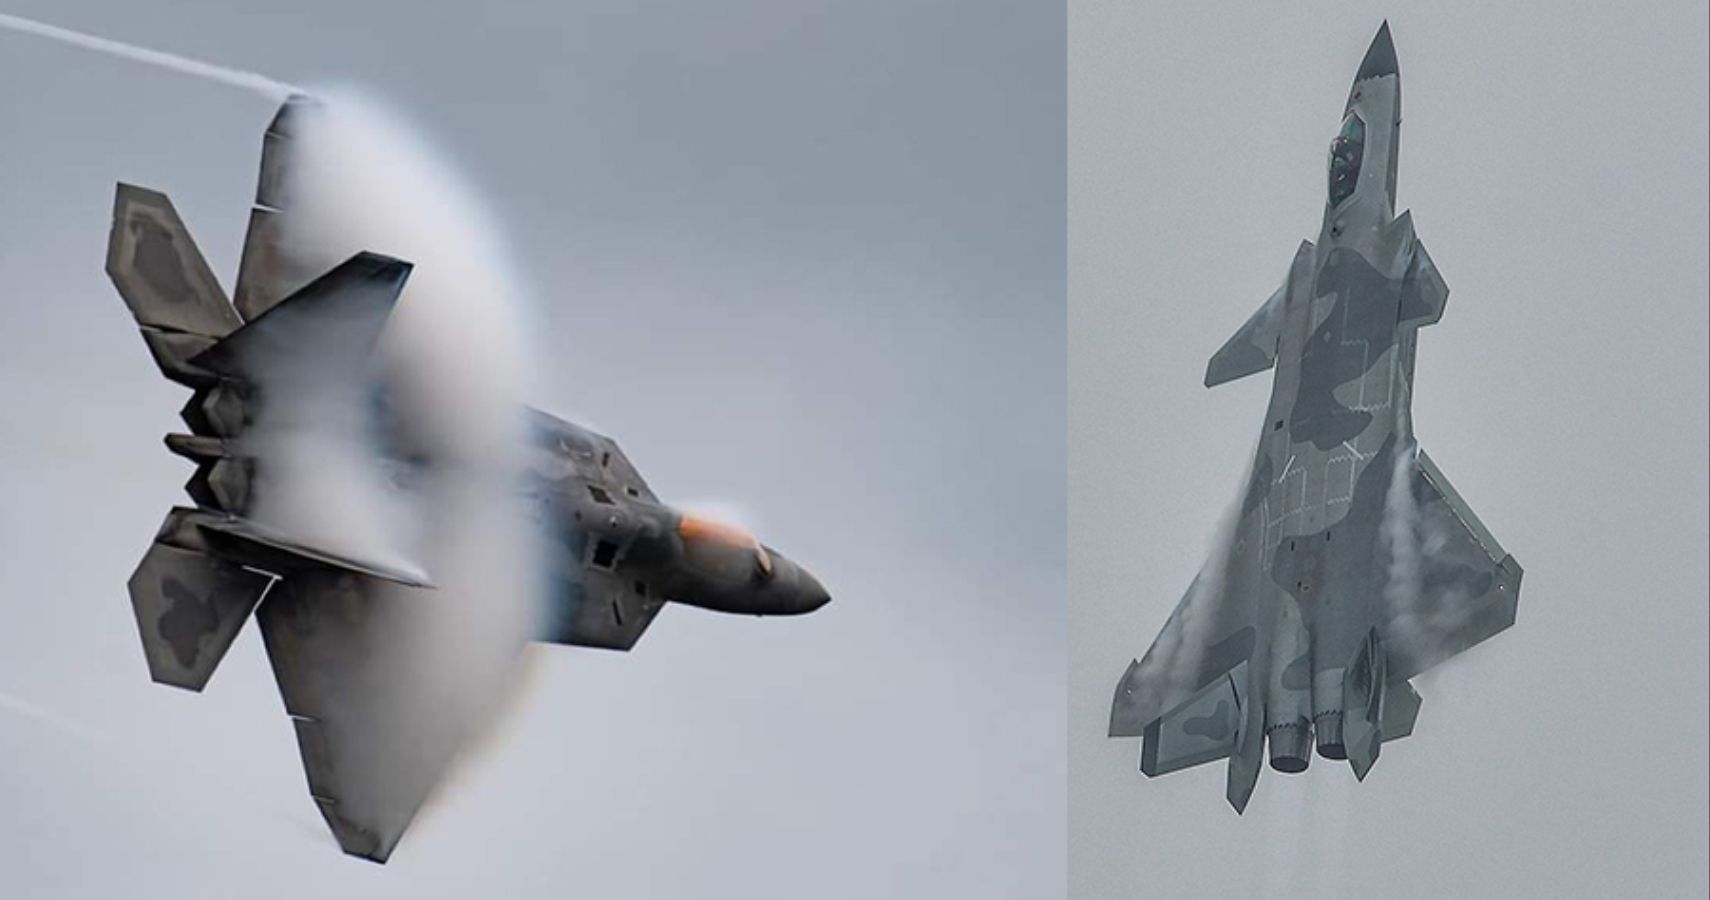 How The F-22 Raptor Compares Against China’s Chengdu J-20 Stealth Fighter